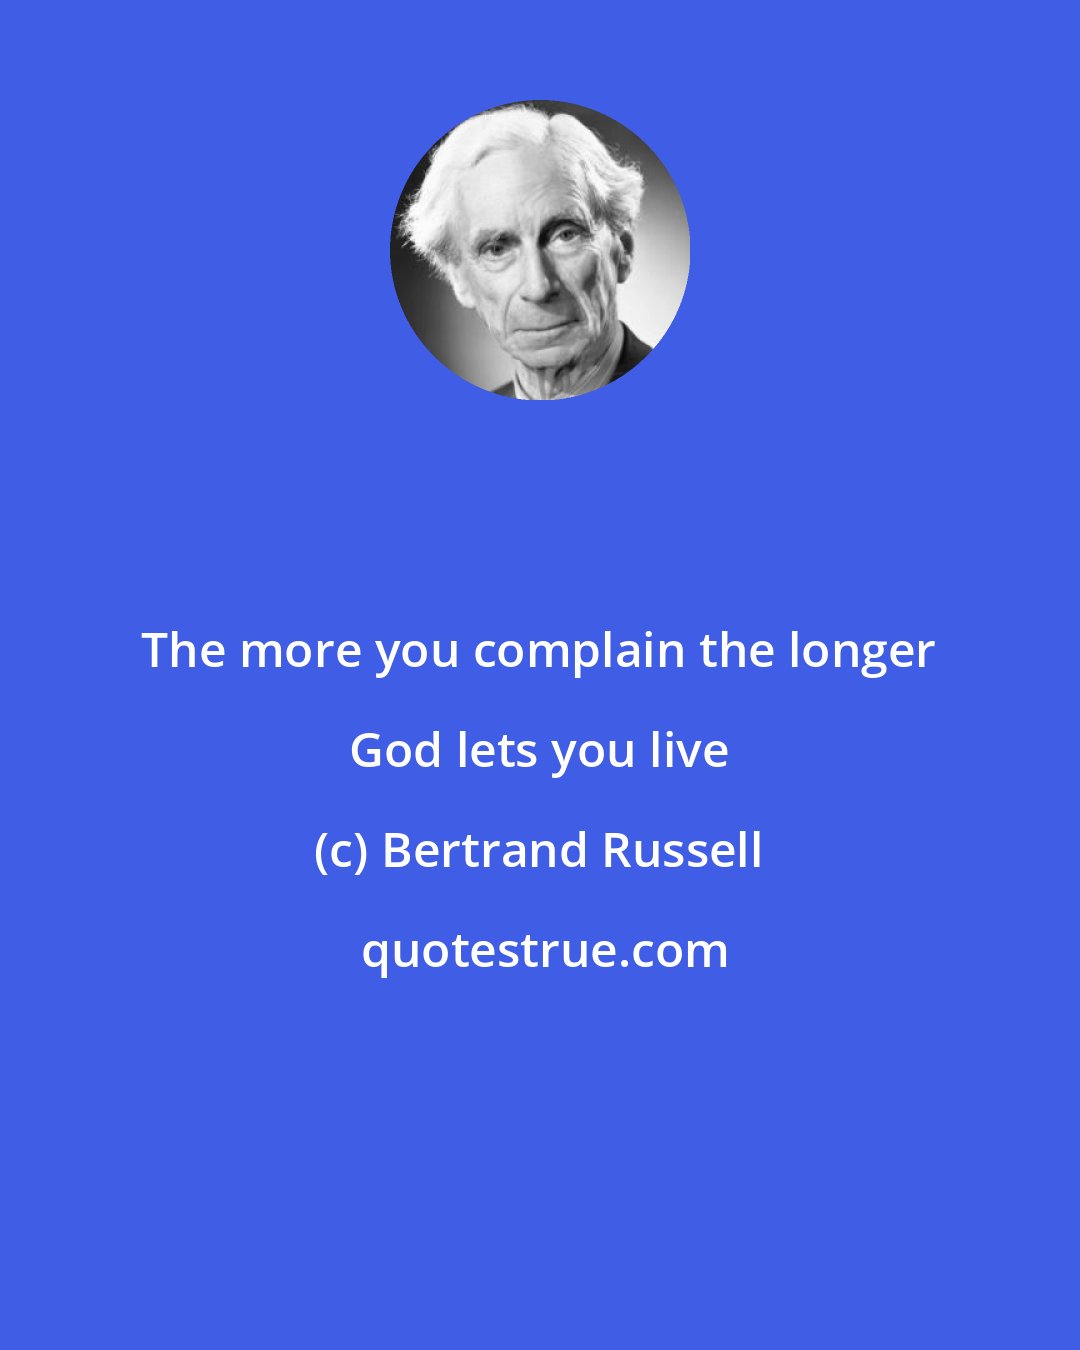 Bertrand Russell: The more you complain the longer God lets you live